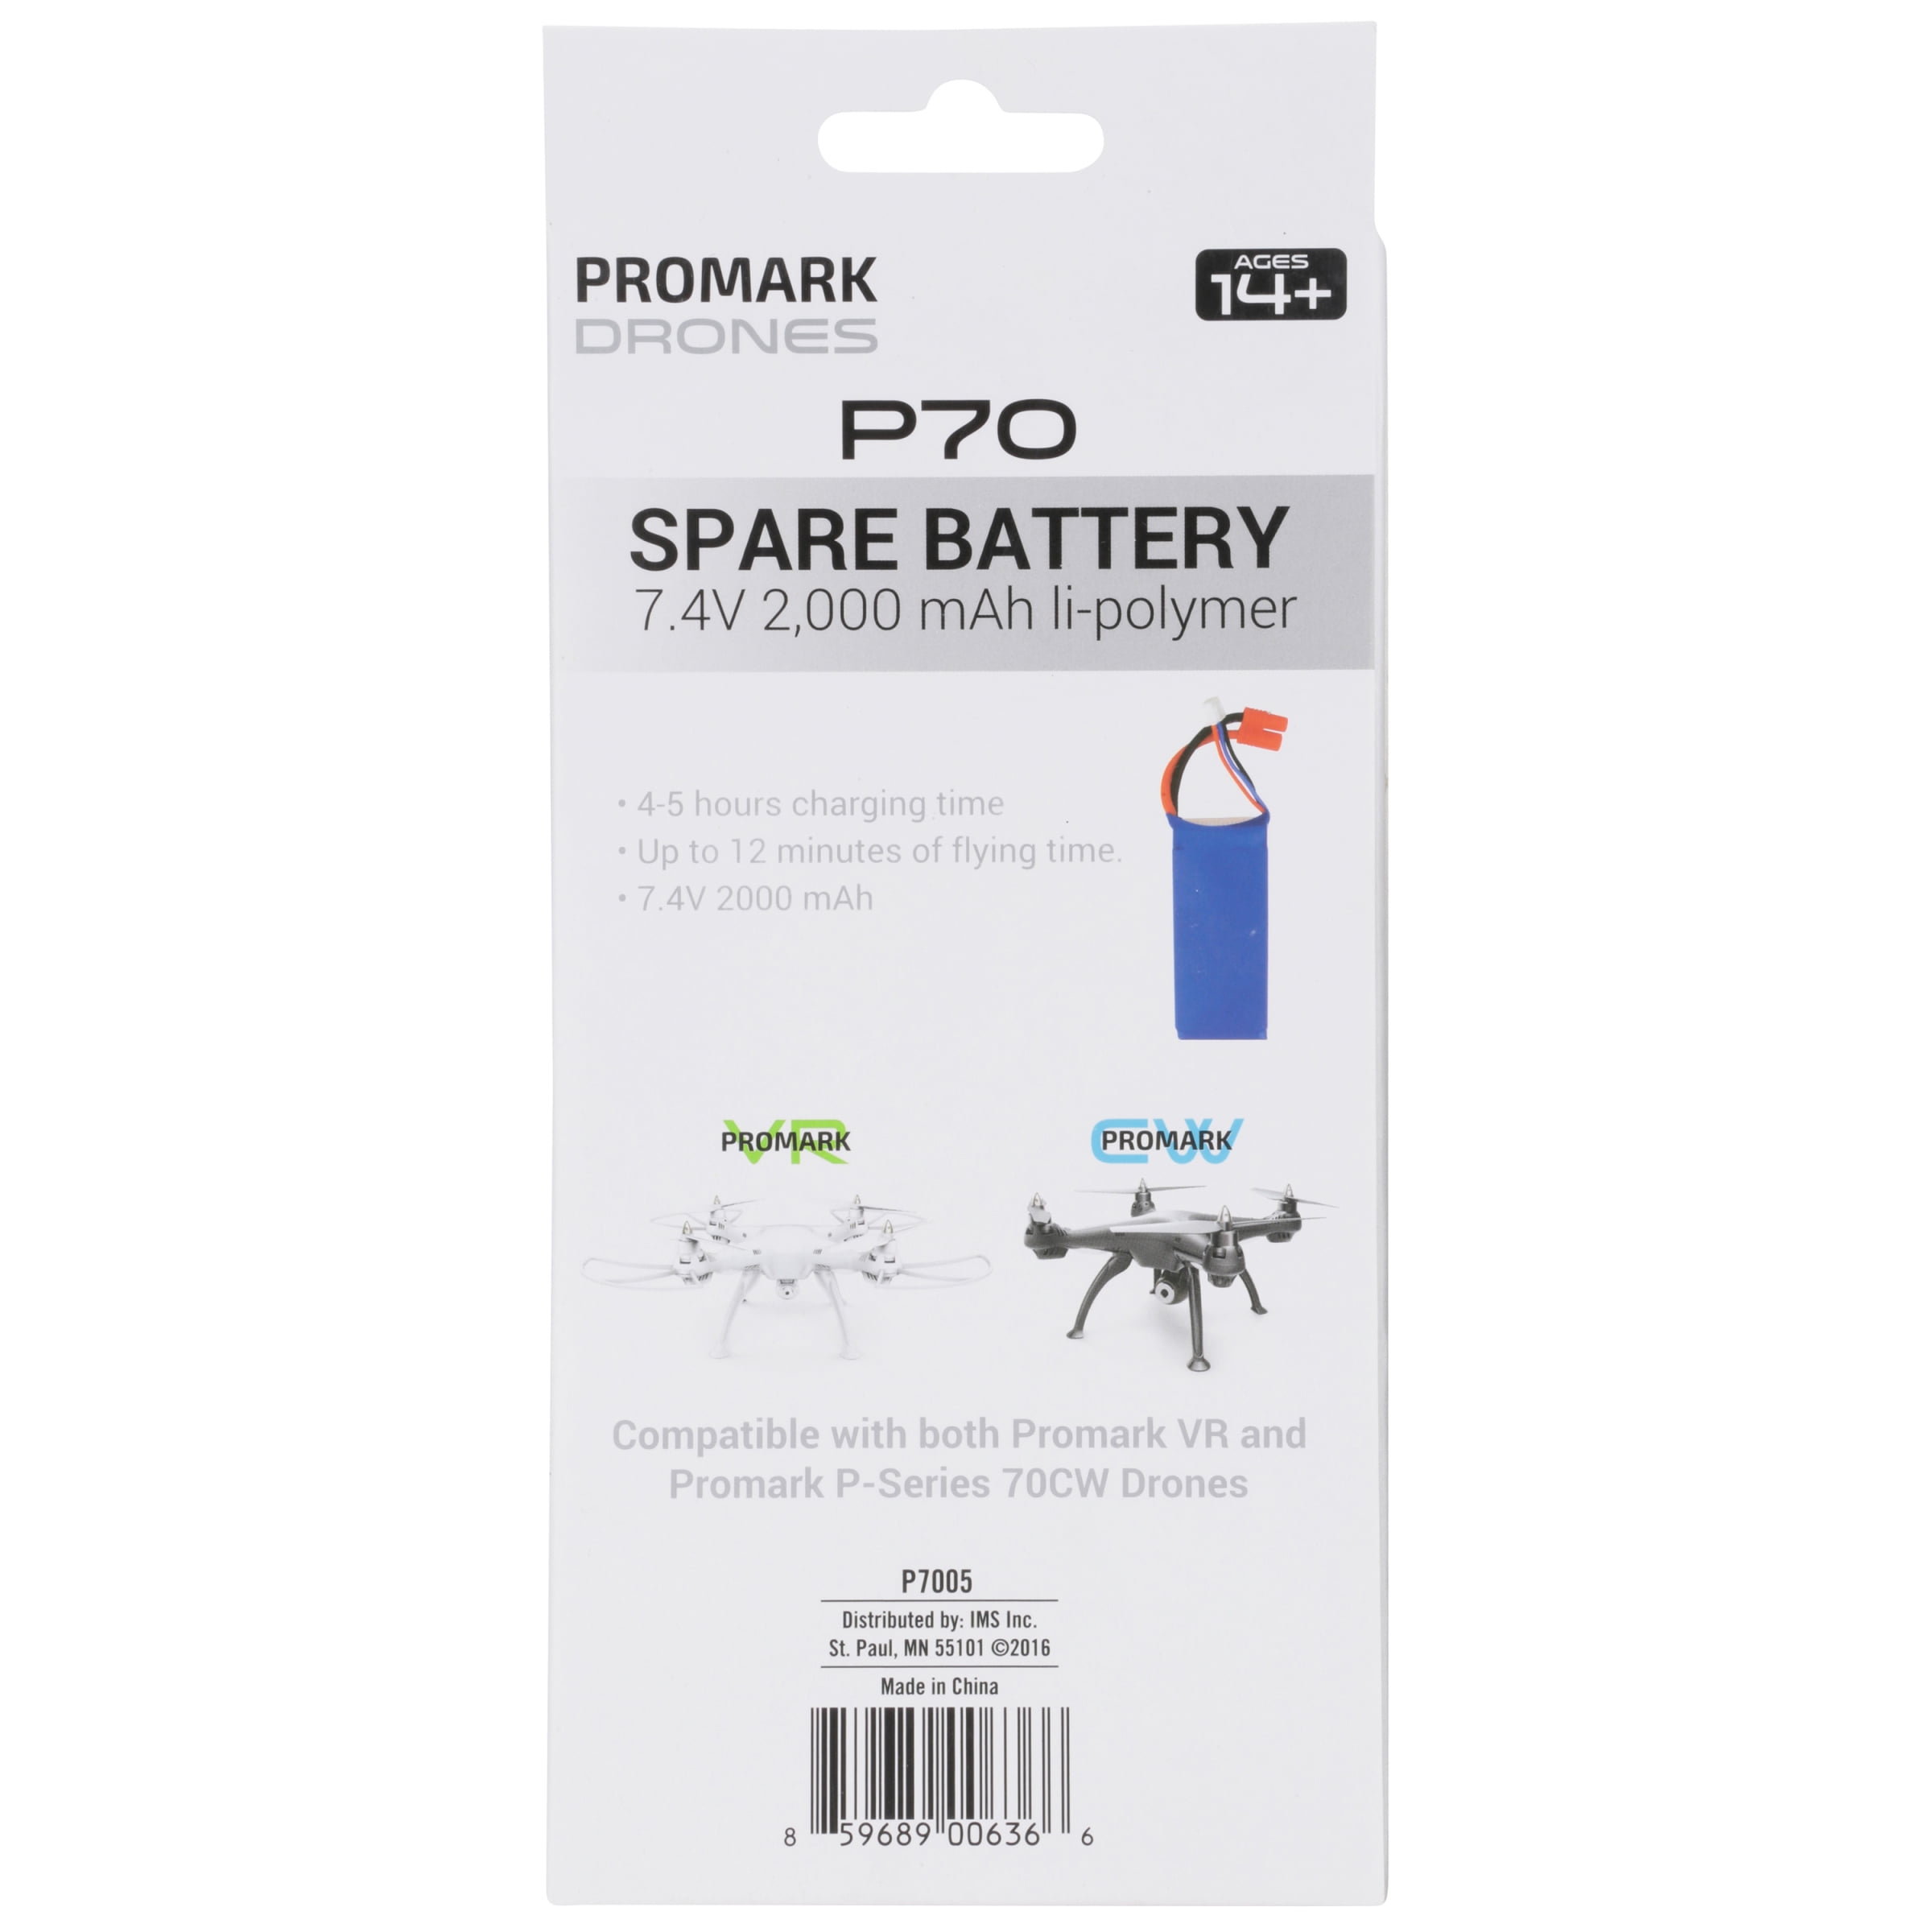 DUAL Balanced Charger Promark Drones P70VR & CW Mega  Power Pack  Batteries 